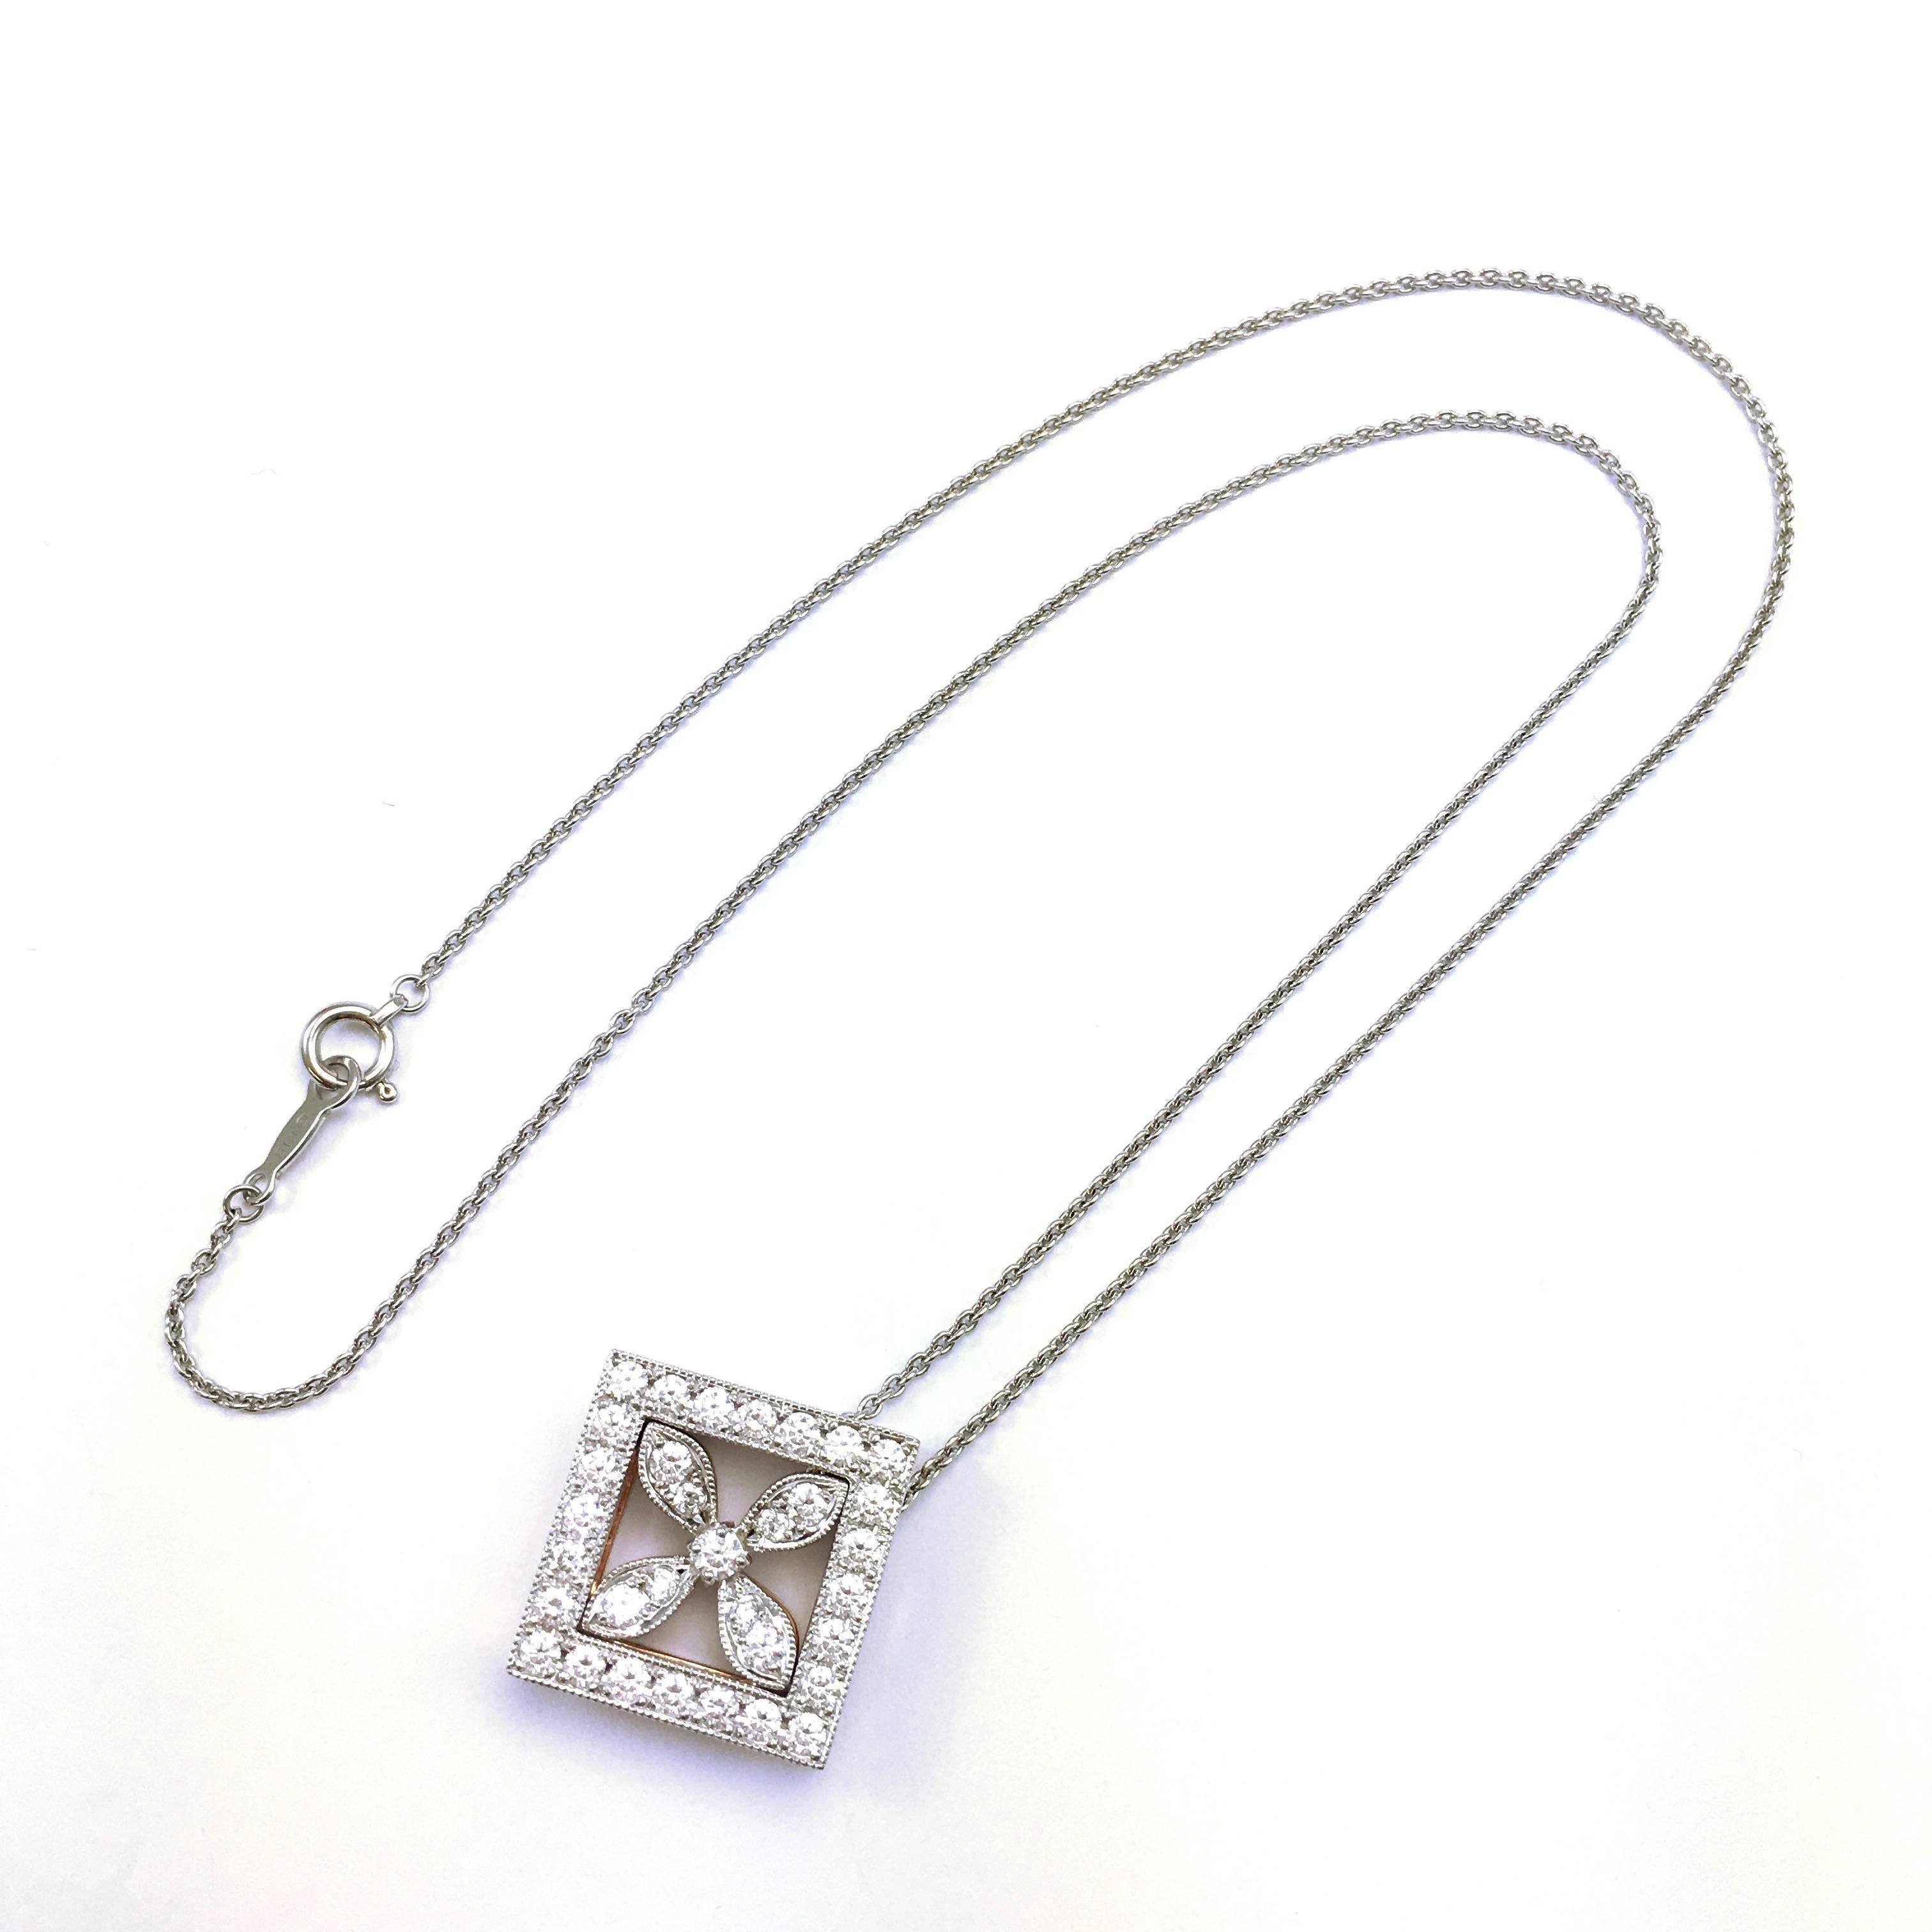 Gorgeous piece of jewelry from Mikimoto. Unusual, because Mikimoto is known for their pearls, but they also created some high quality diamond jewelry. 18K white and rose gold pendant on 16" white gold chain. The pendant is composed of two